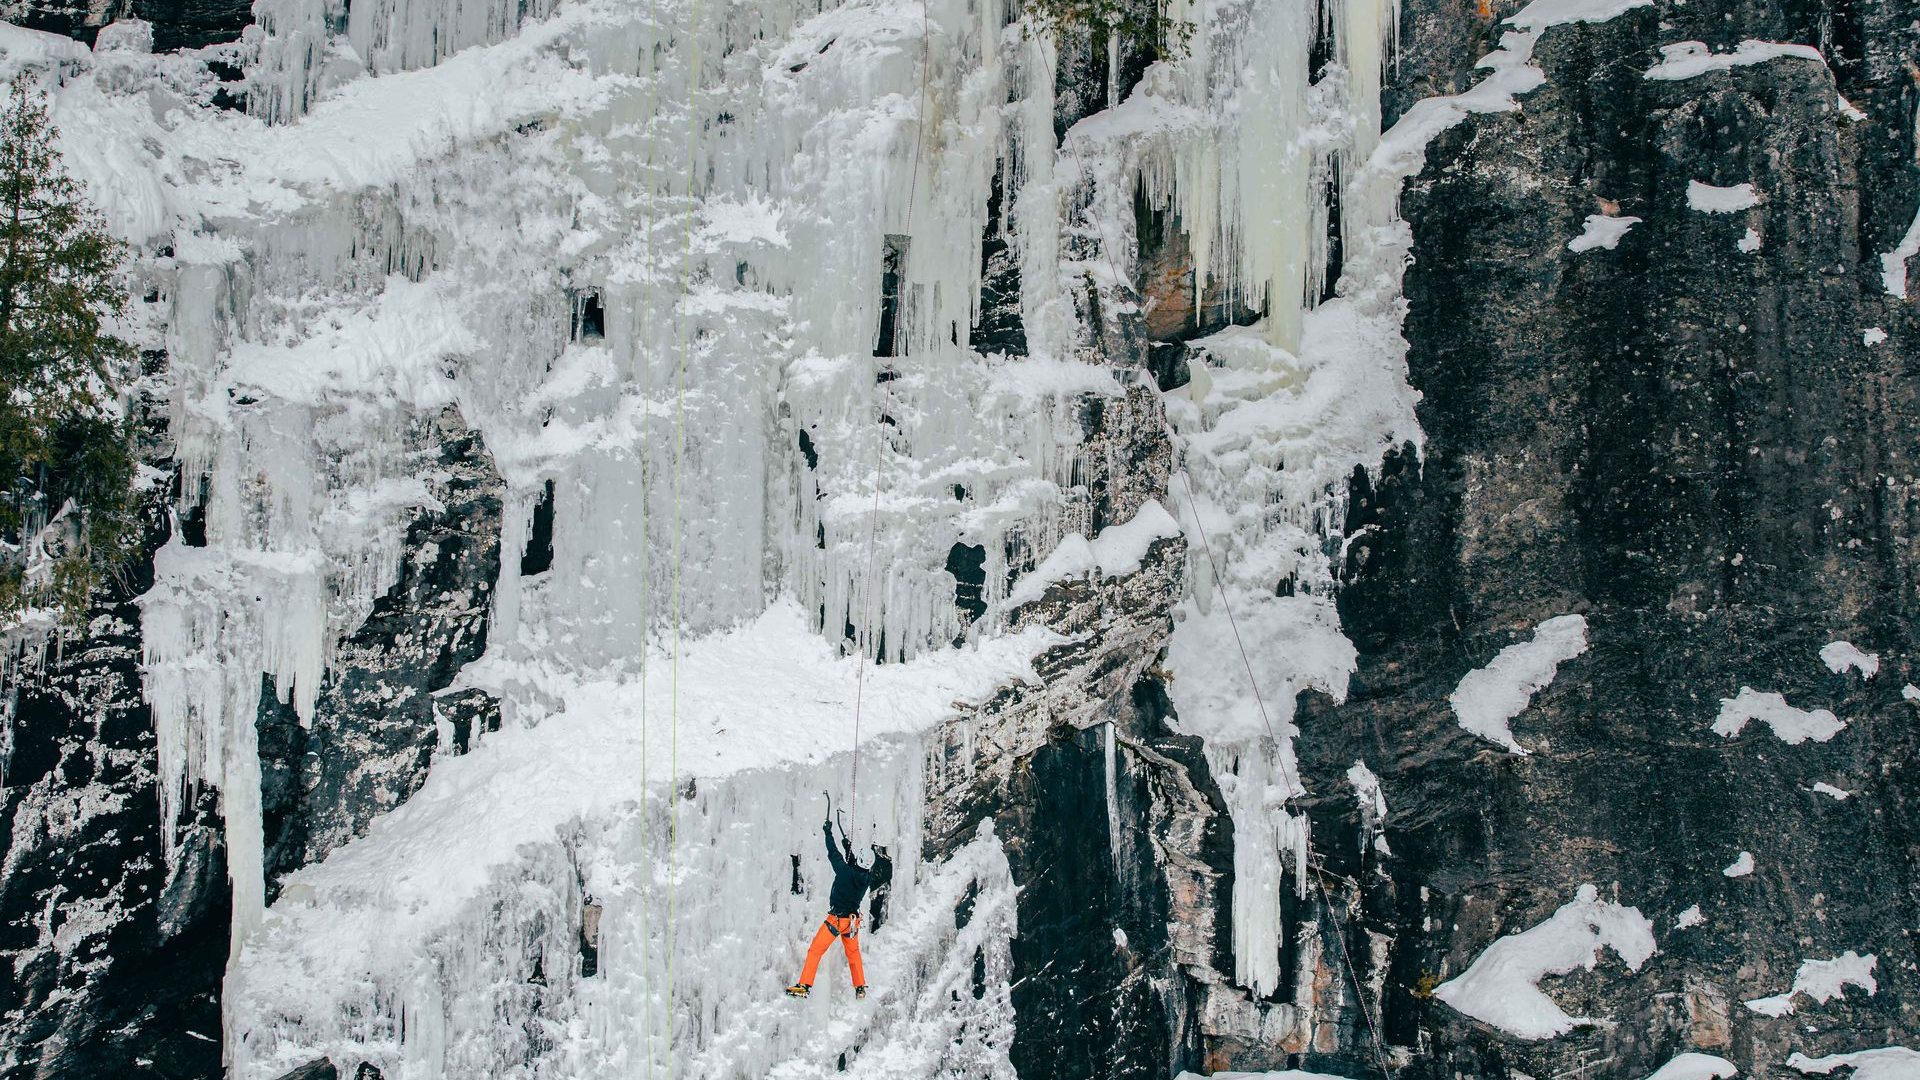 an idea climber scales a vertical waterfall, production still from mainspring agency's video project, the connections series